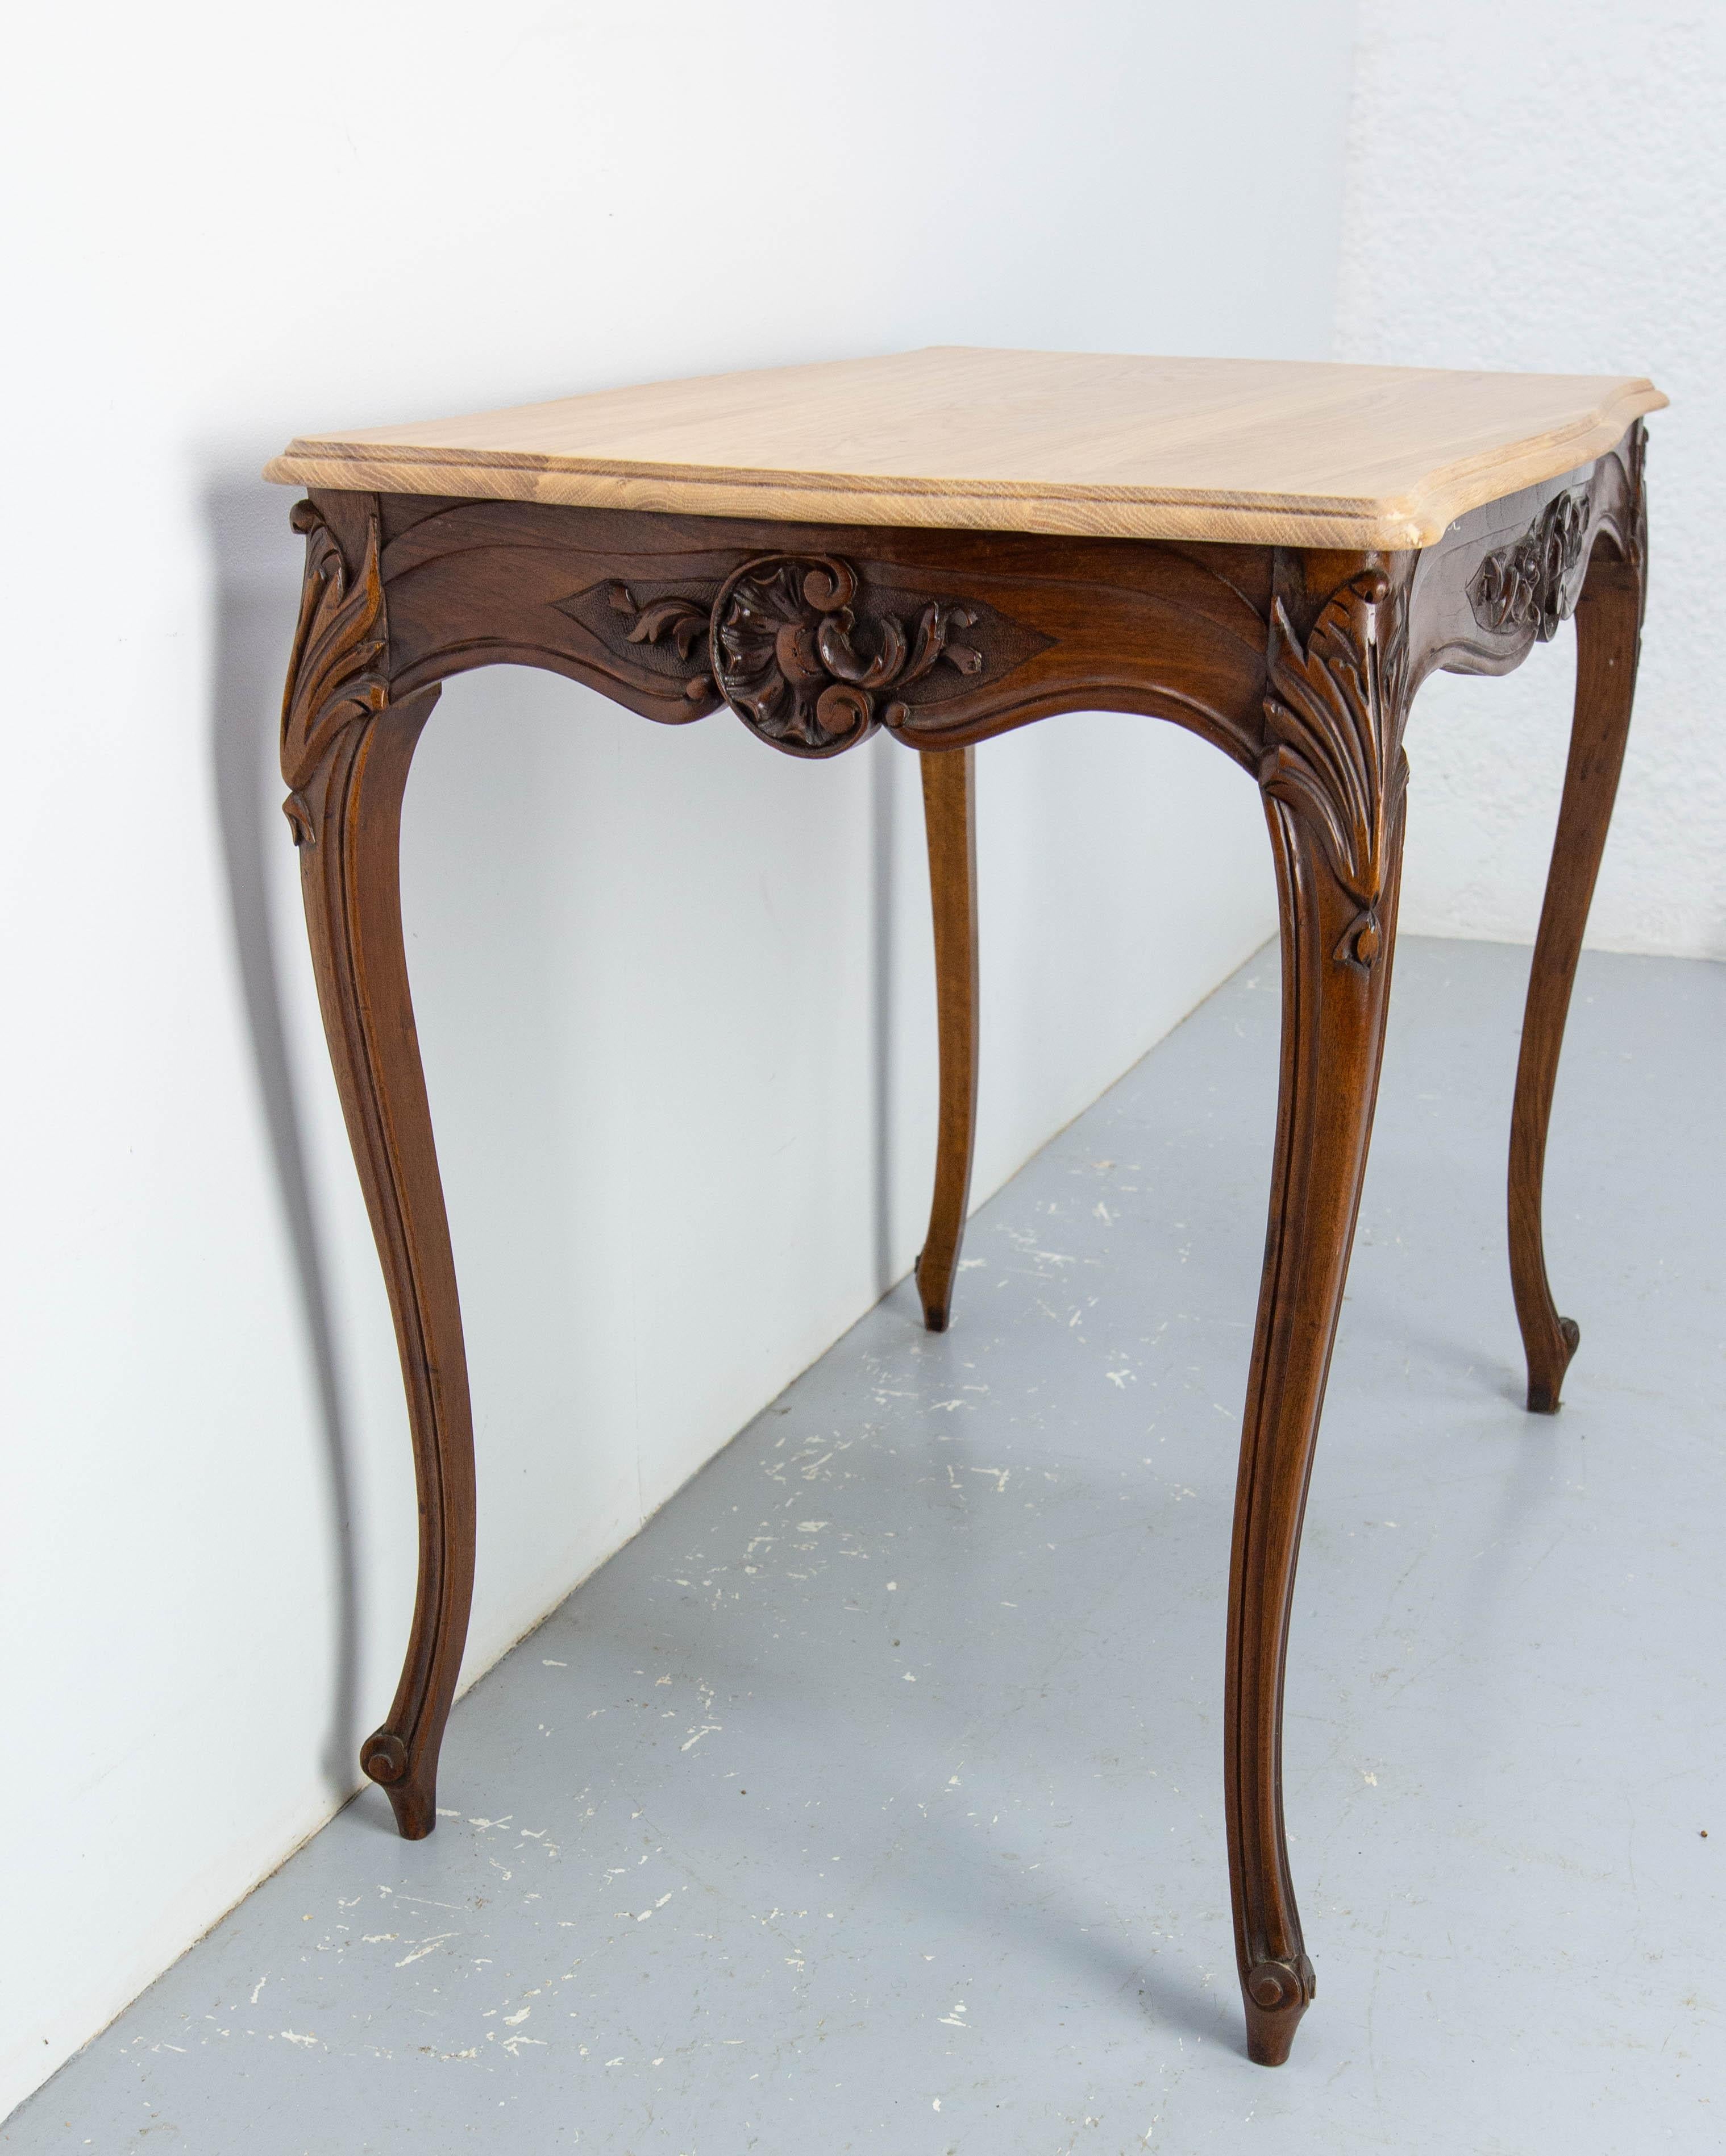 Early 20th Century French Walnut & Oak Side Table in the Louis XV Style with Hiden Drawer, c. 1900 For Sale